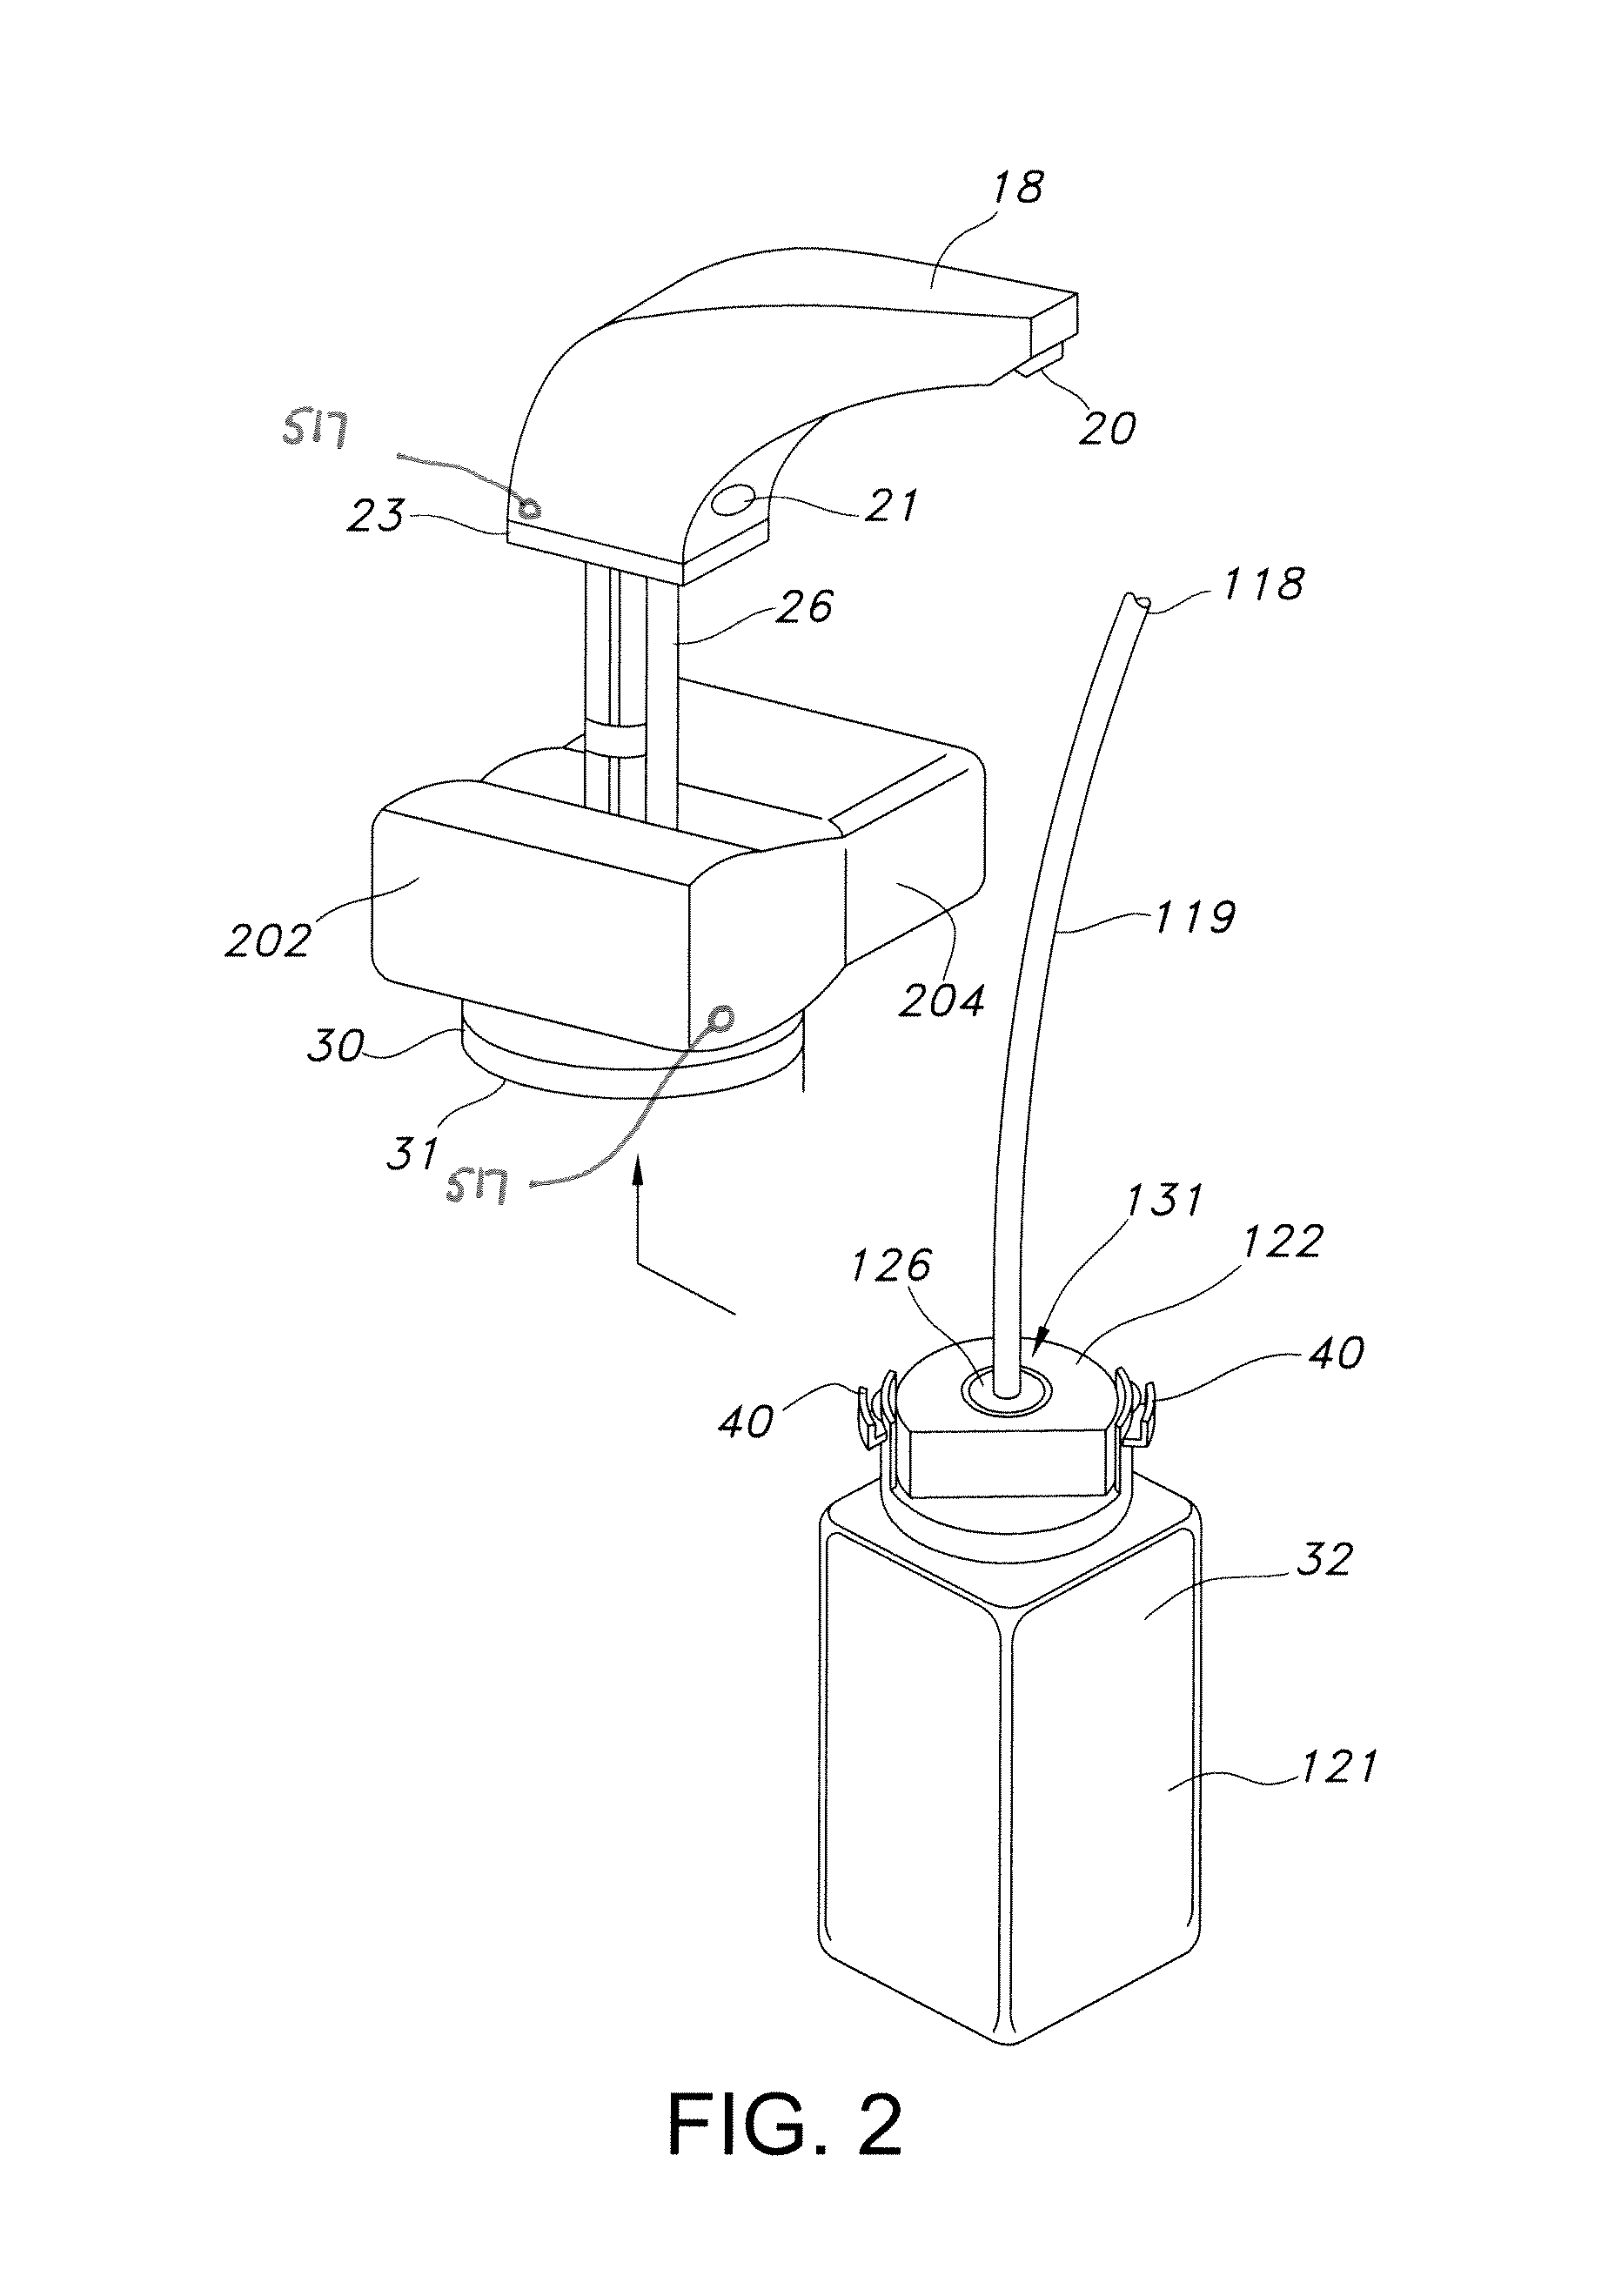 Fluid Dispenser with Cleaning/Maintenance Mode